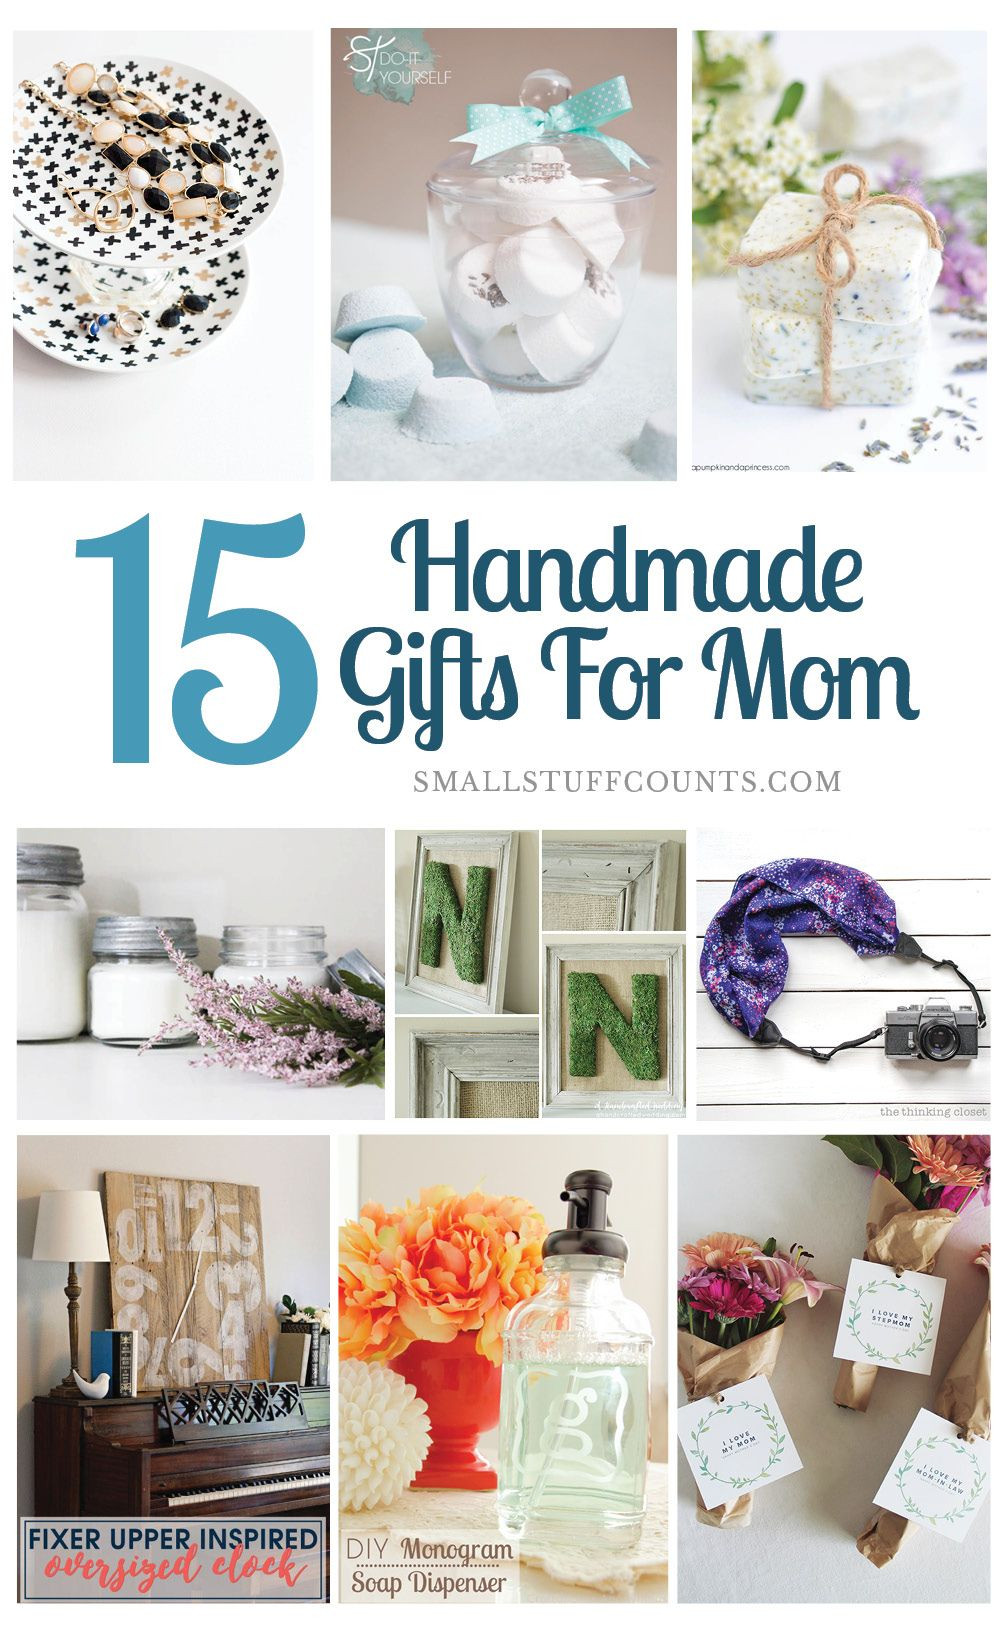 Holiday Gift Ideas For Mom
 Beautiful DIY Gift Ideas For Mom crafts